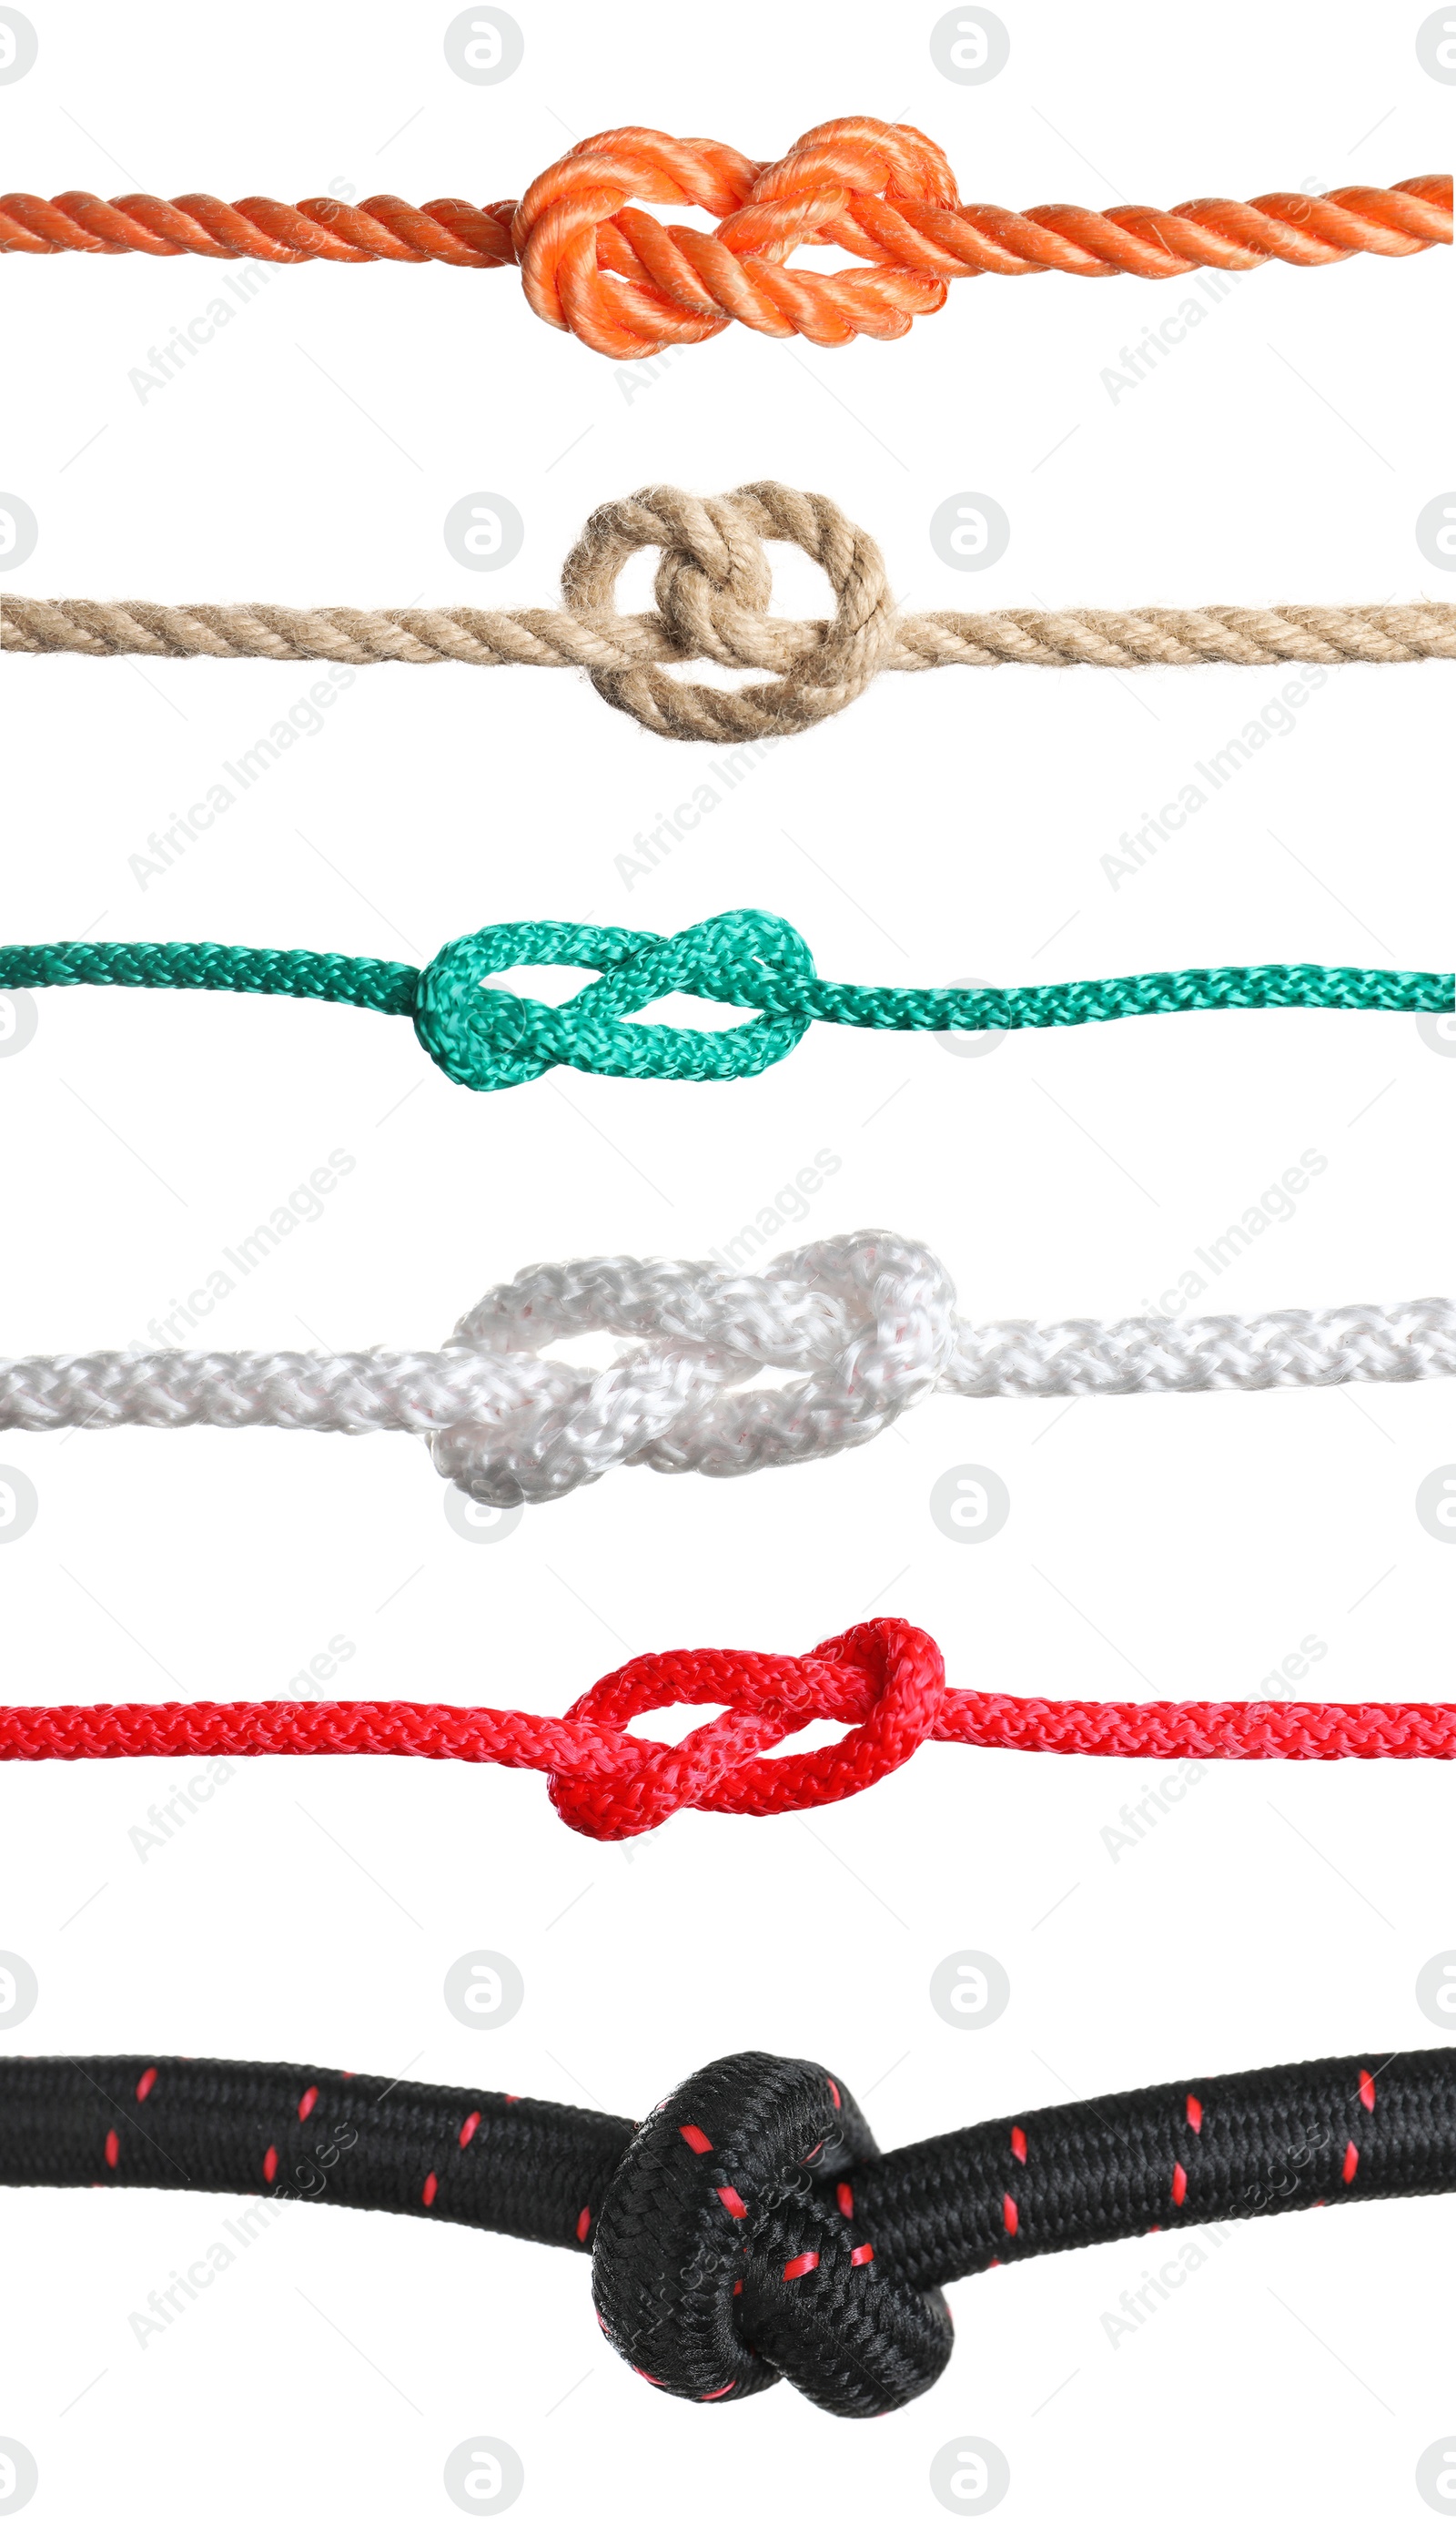 Image of Set of different ropes with knots on white background